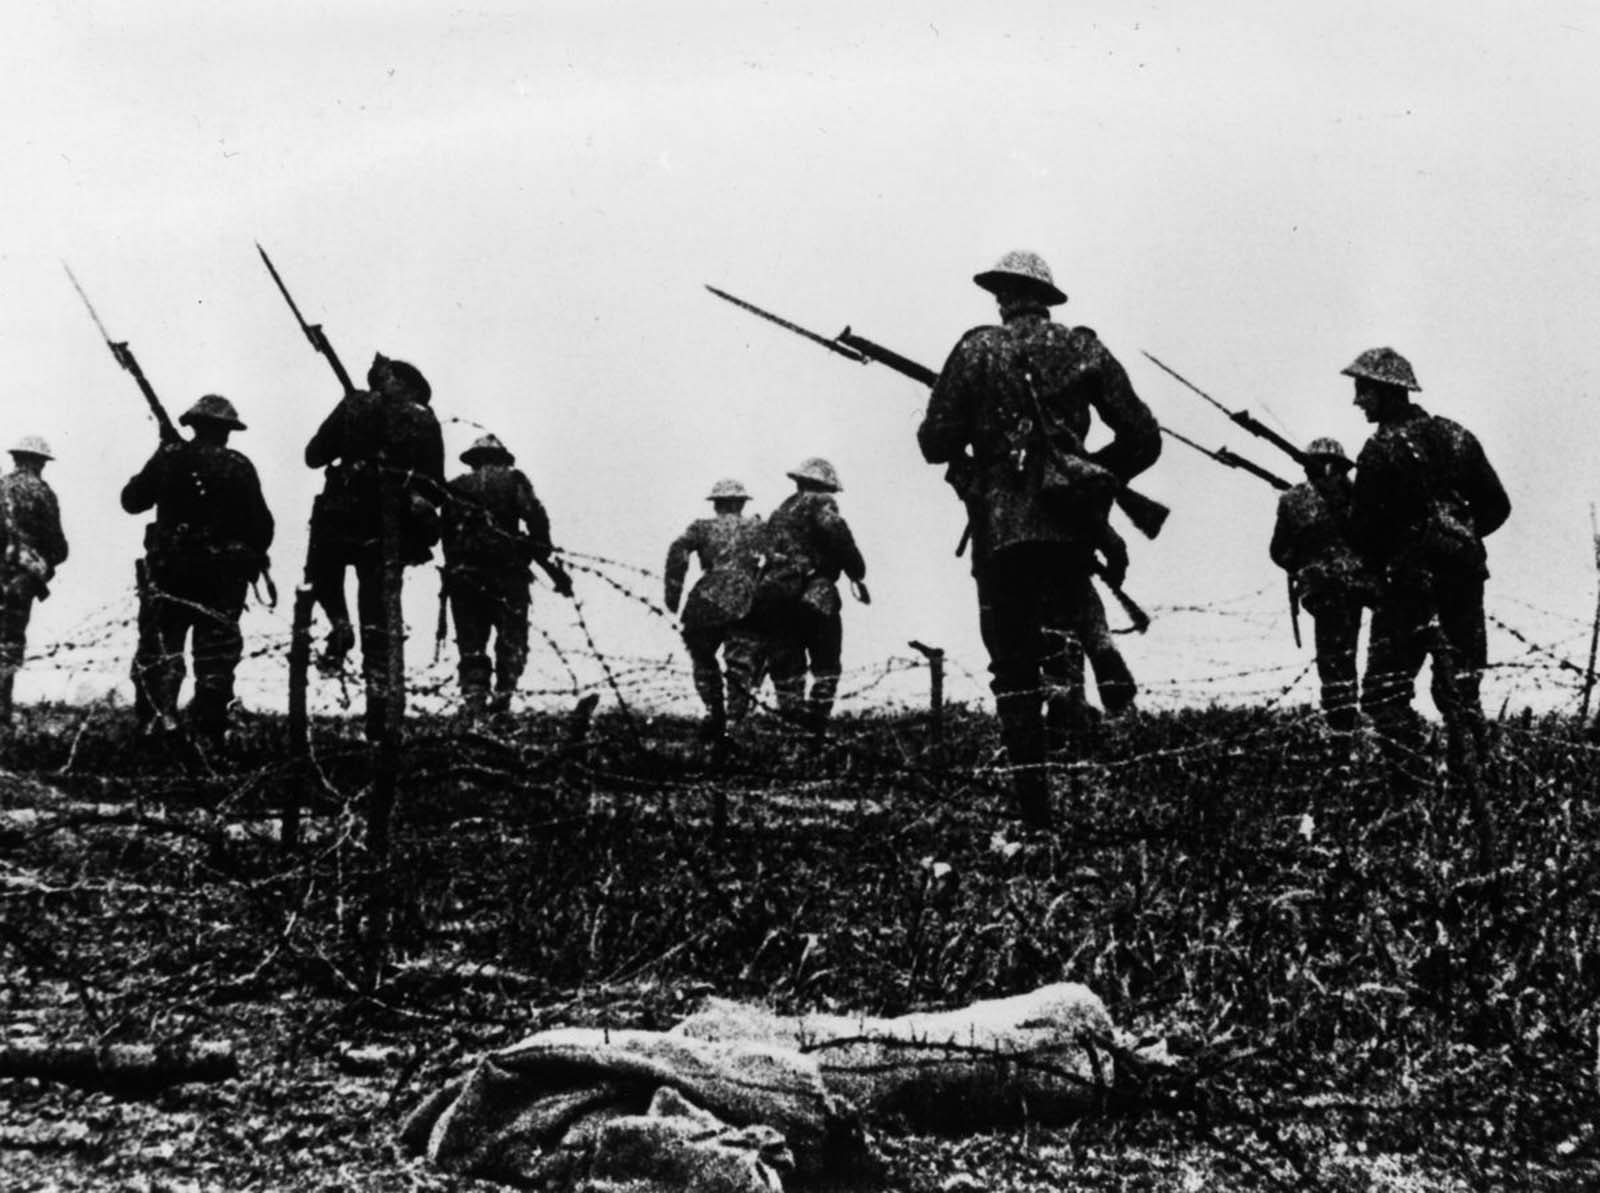 British troops go “over the top” in a scene staged for a newsreel film on the battle. 1916.